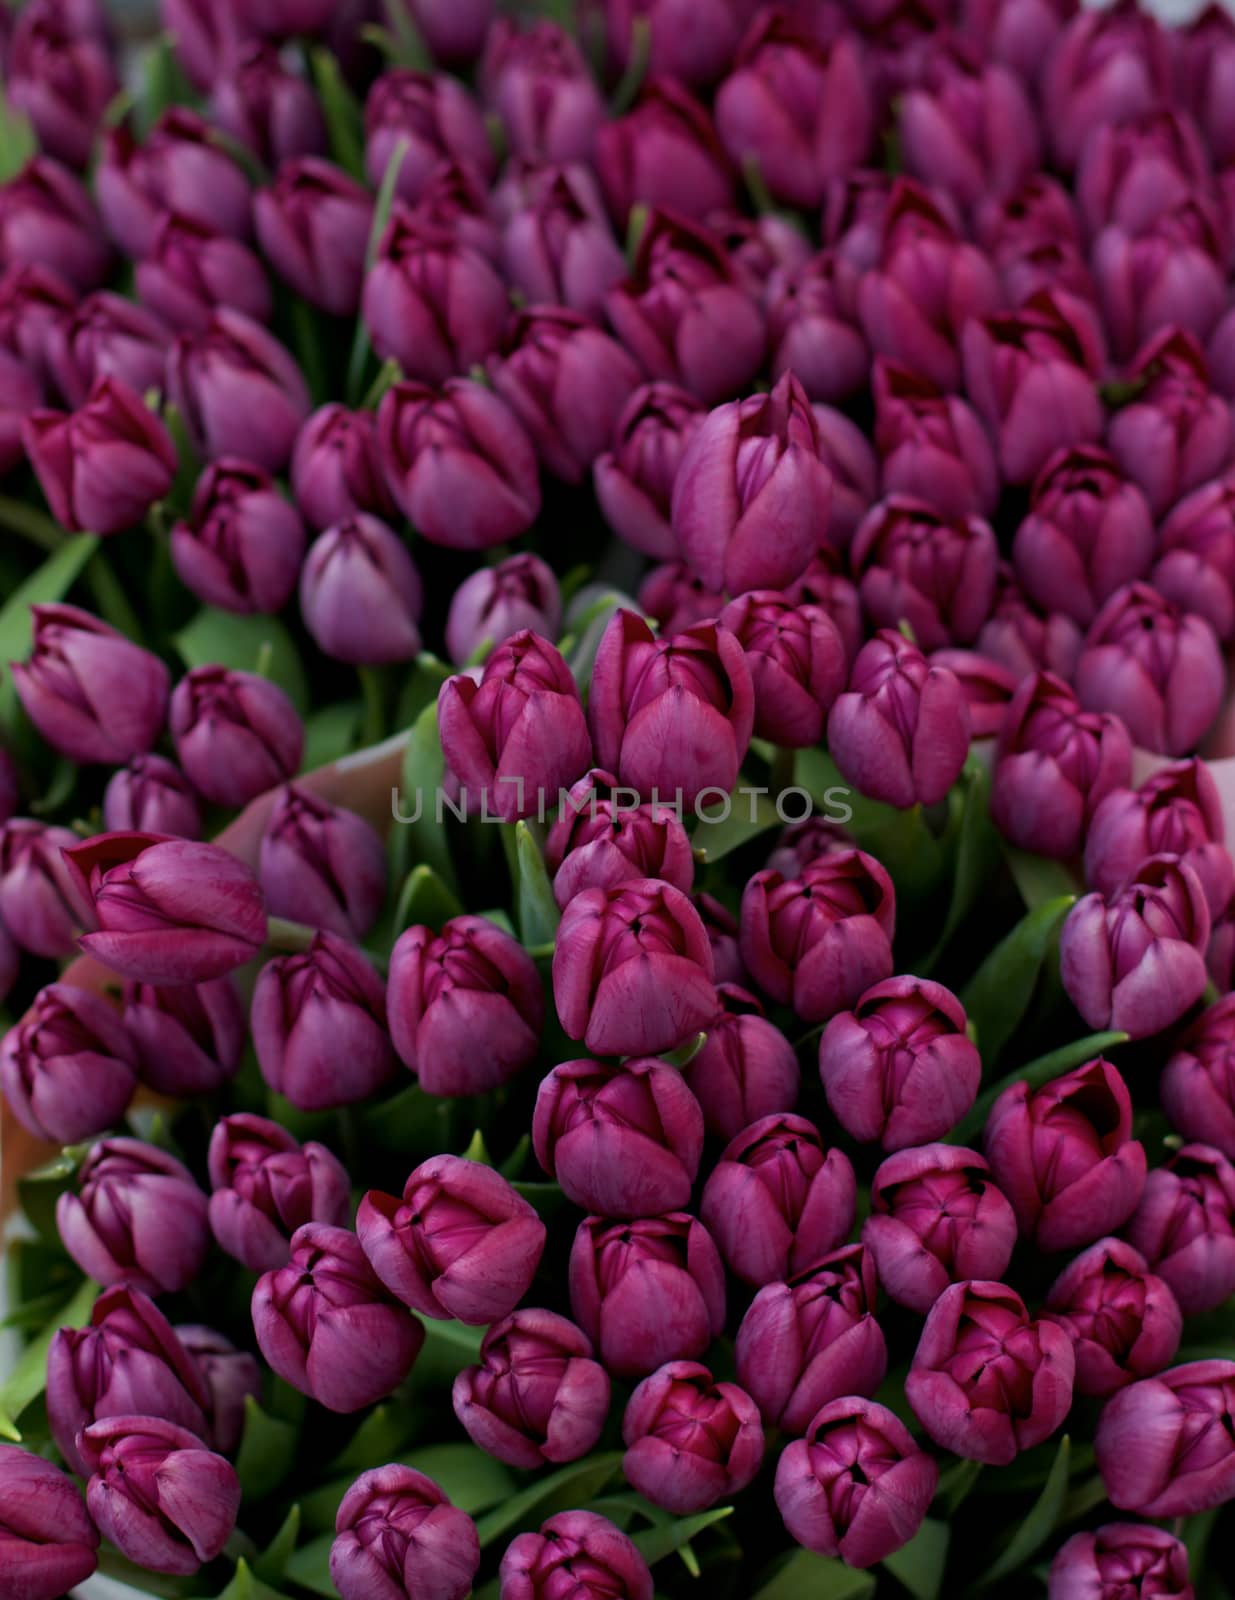 Beauty Purple Tulip Buds closeup as Background Outdoors. Focus on Foreground